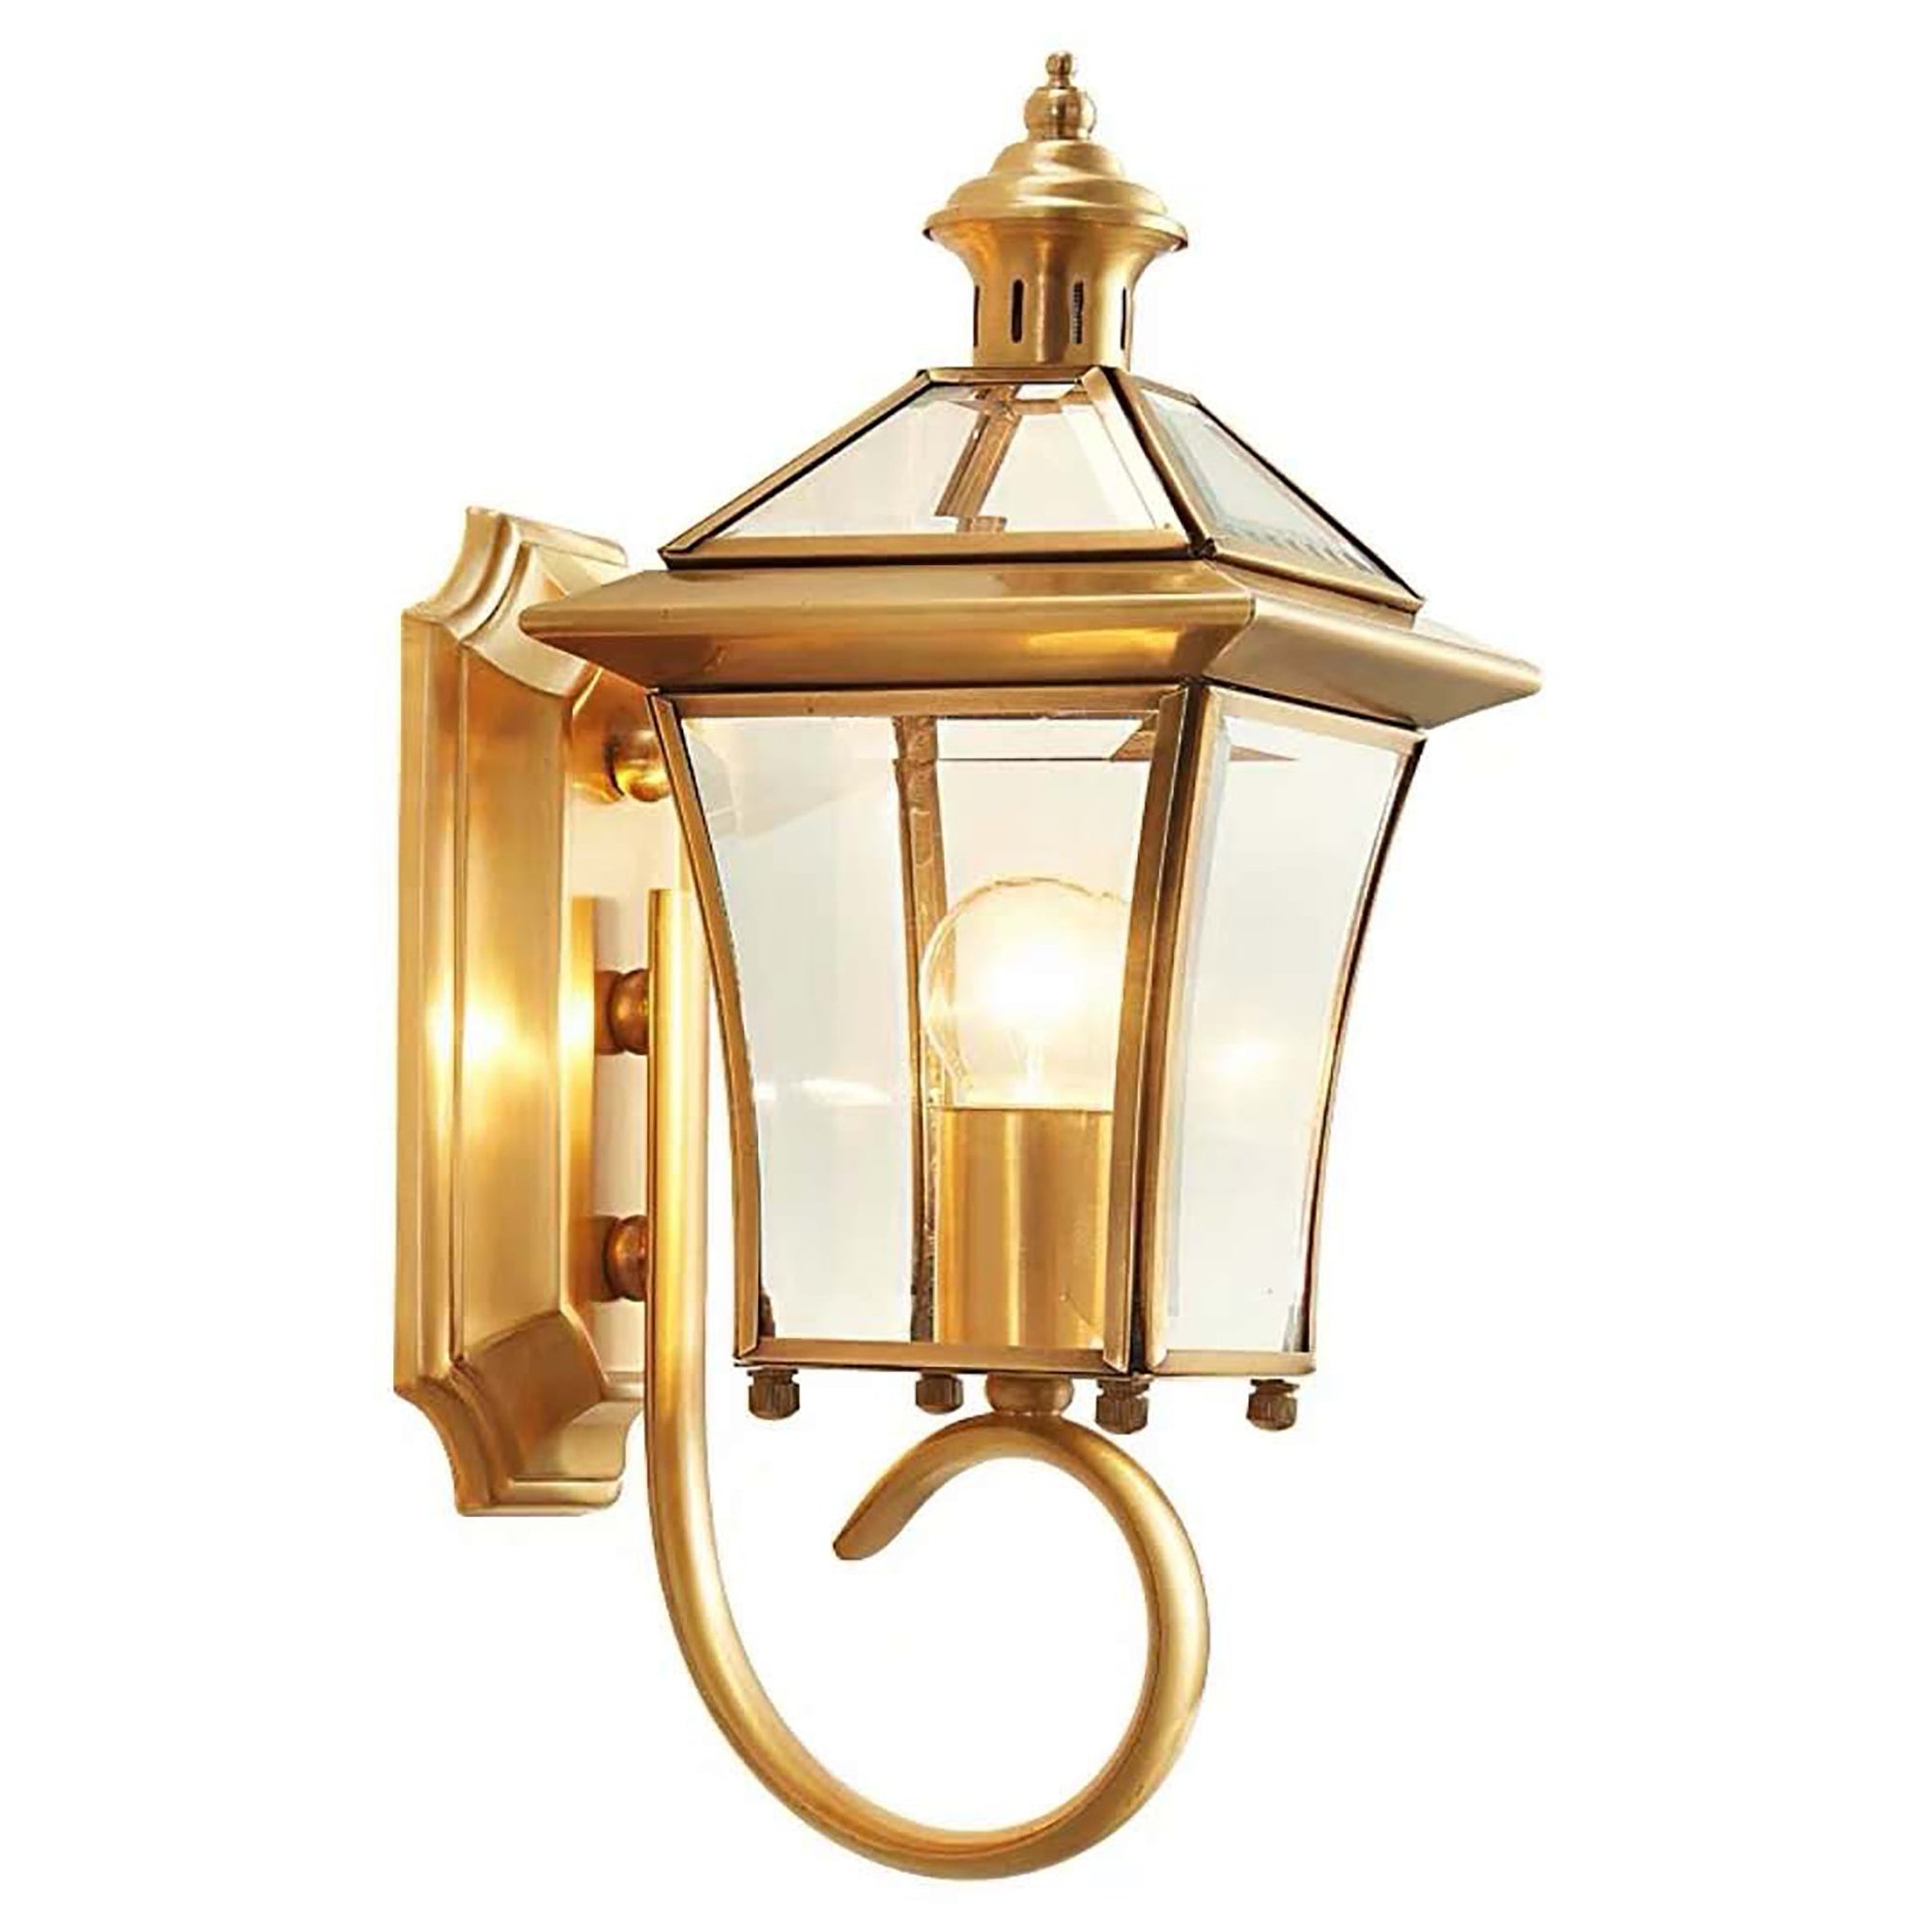 Buy Guiding Wall Lamp Online